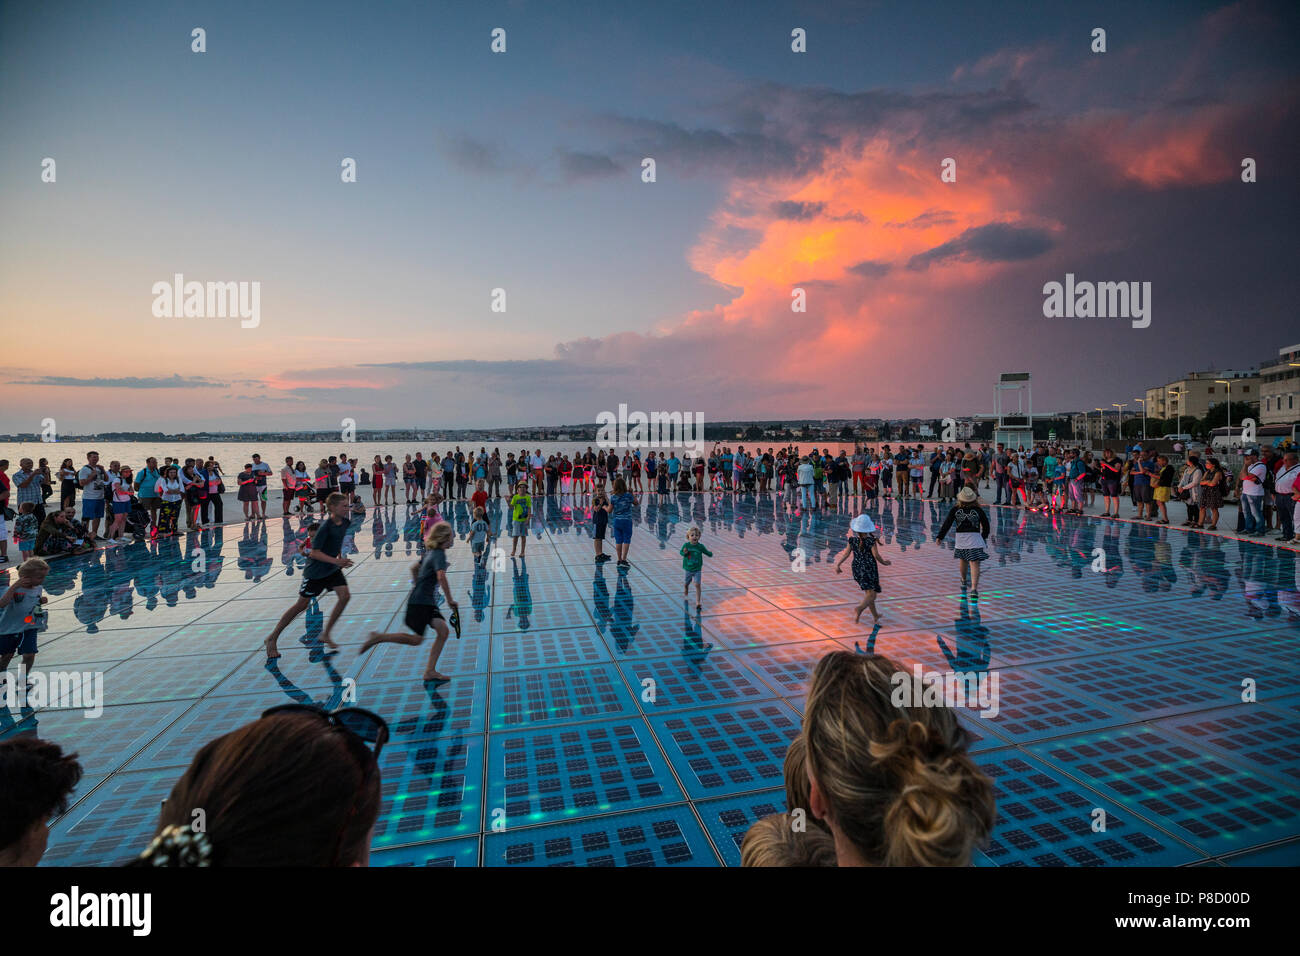 Children playing on the monument Greetings to the sun in Zadar at sunset Stock Photo